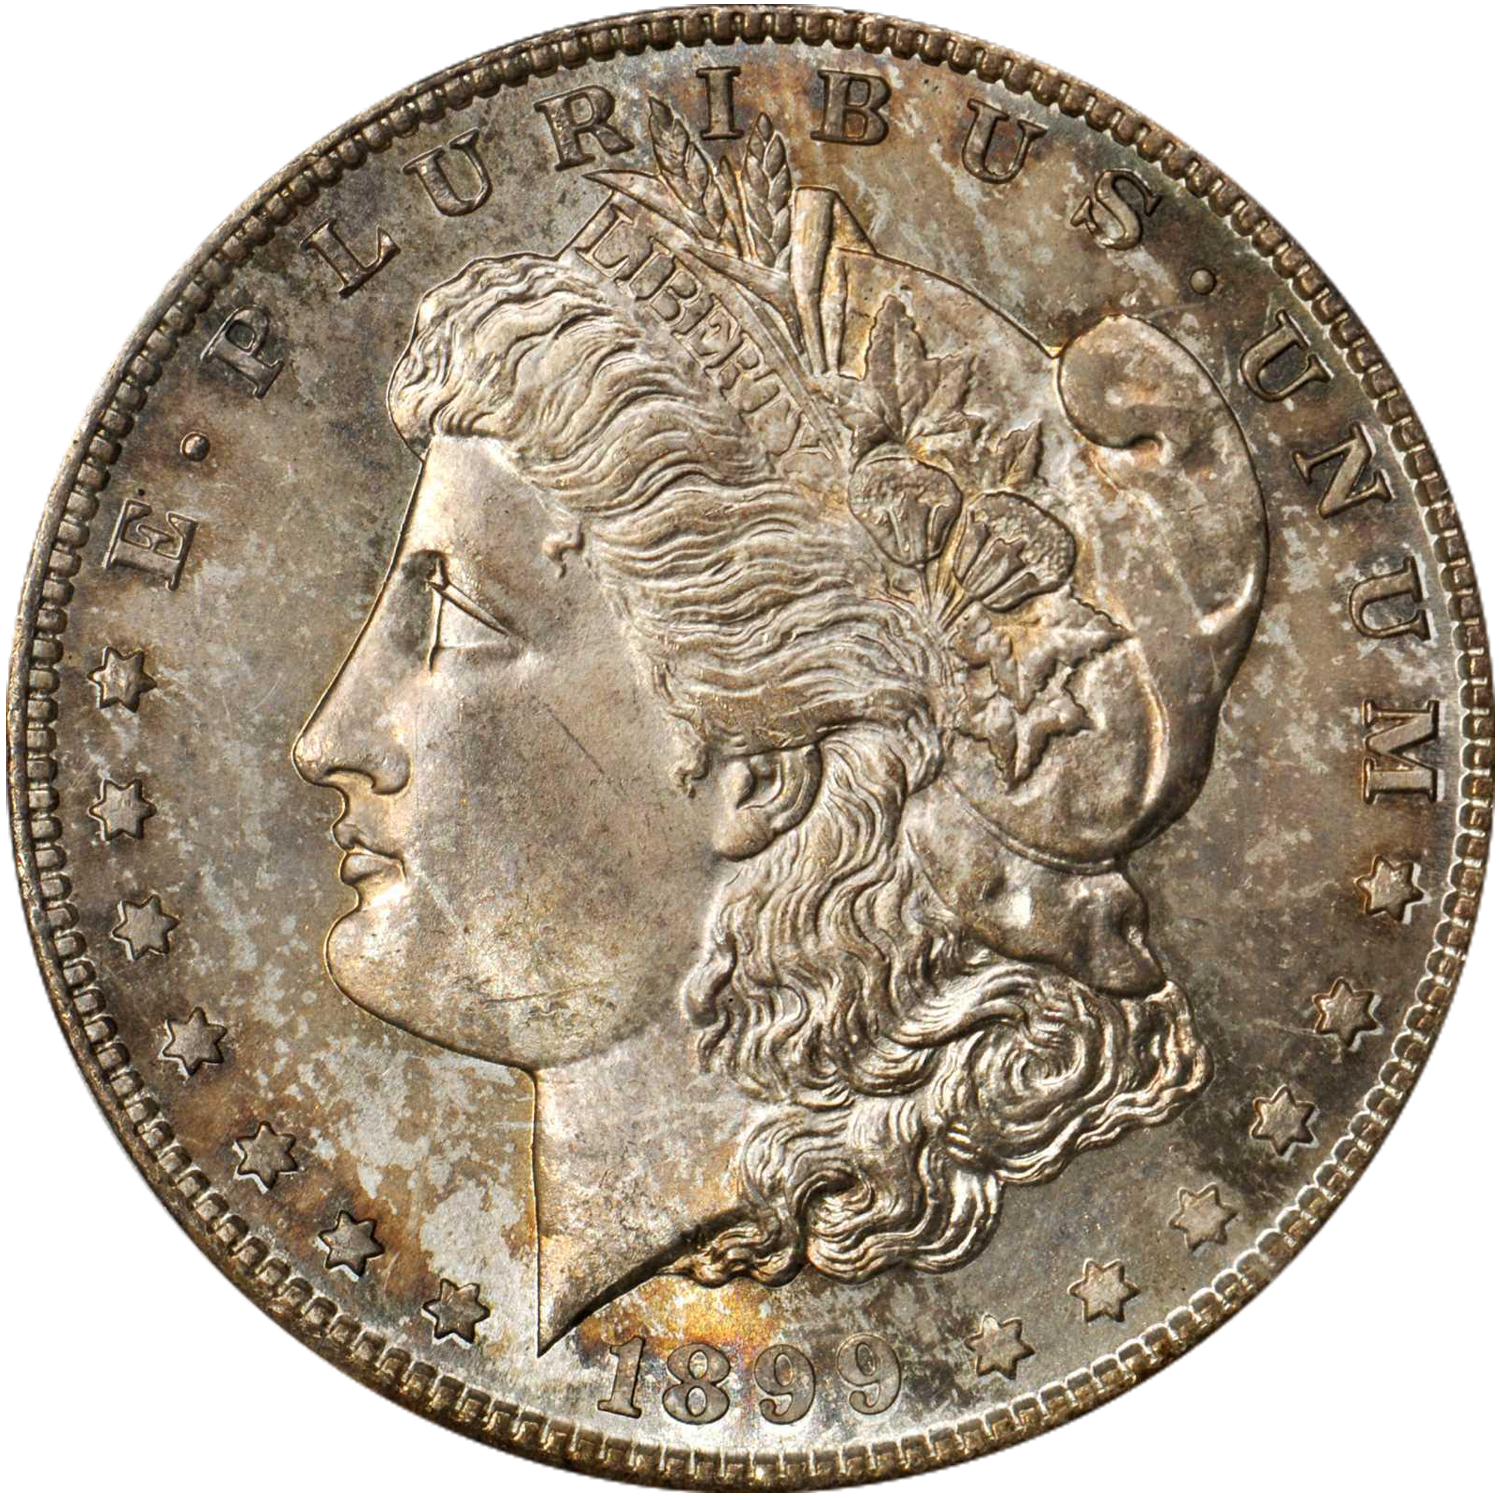 1899 s mint morgan dollar price guide value